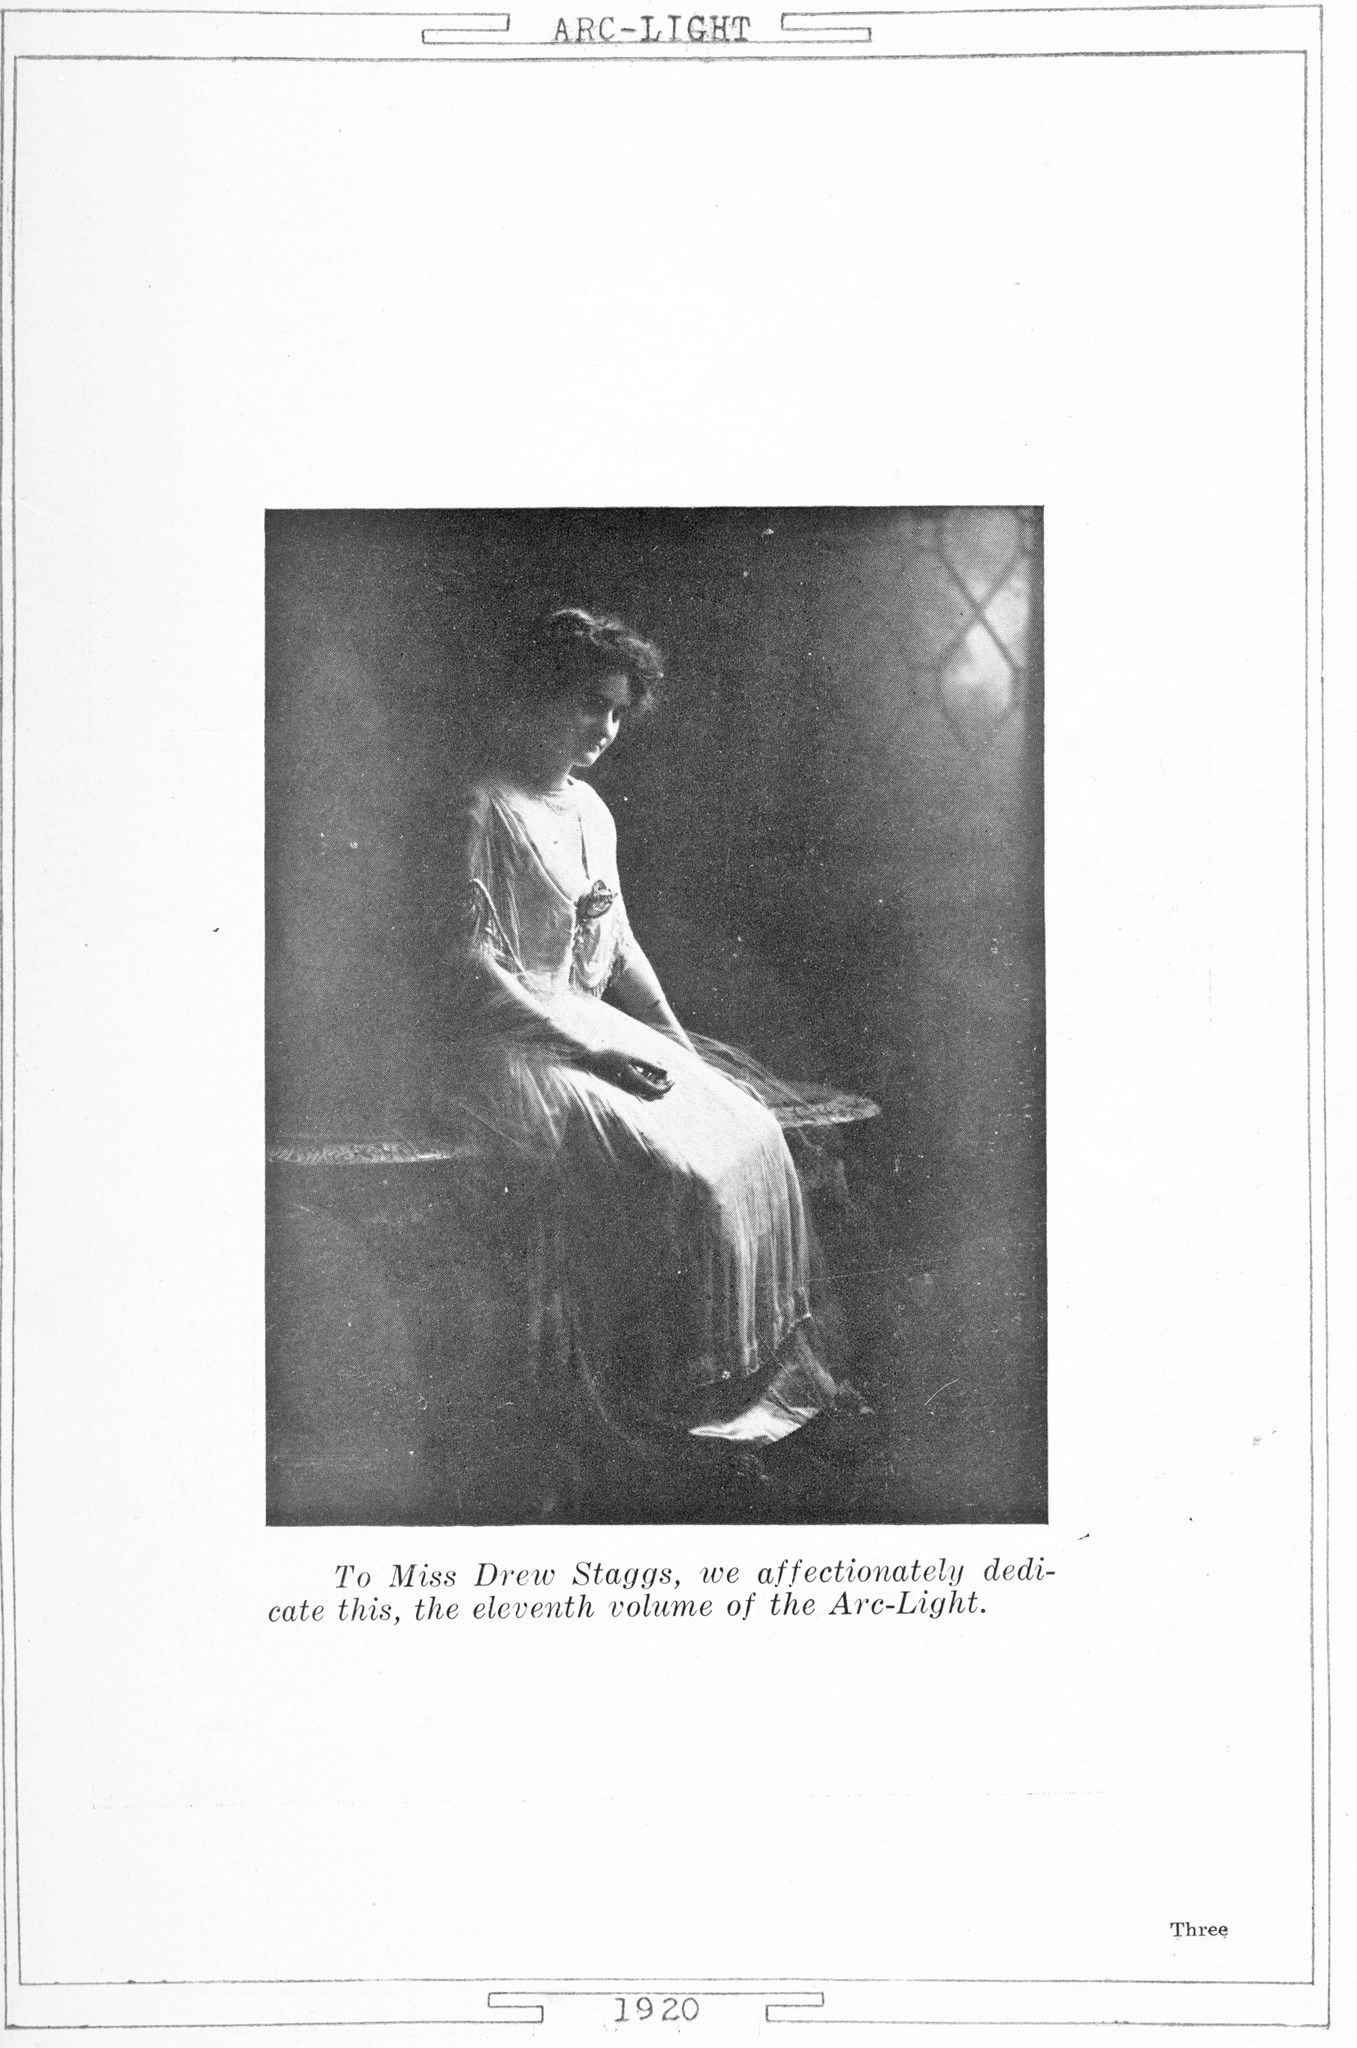 ../../../Images/Large/1920/Arclight-1920-pg0003.jpg